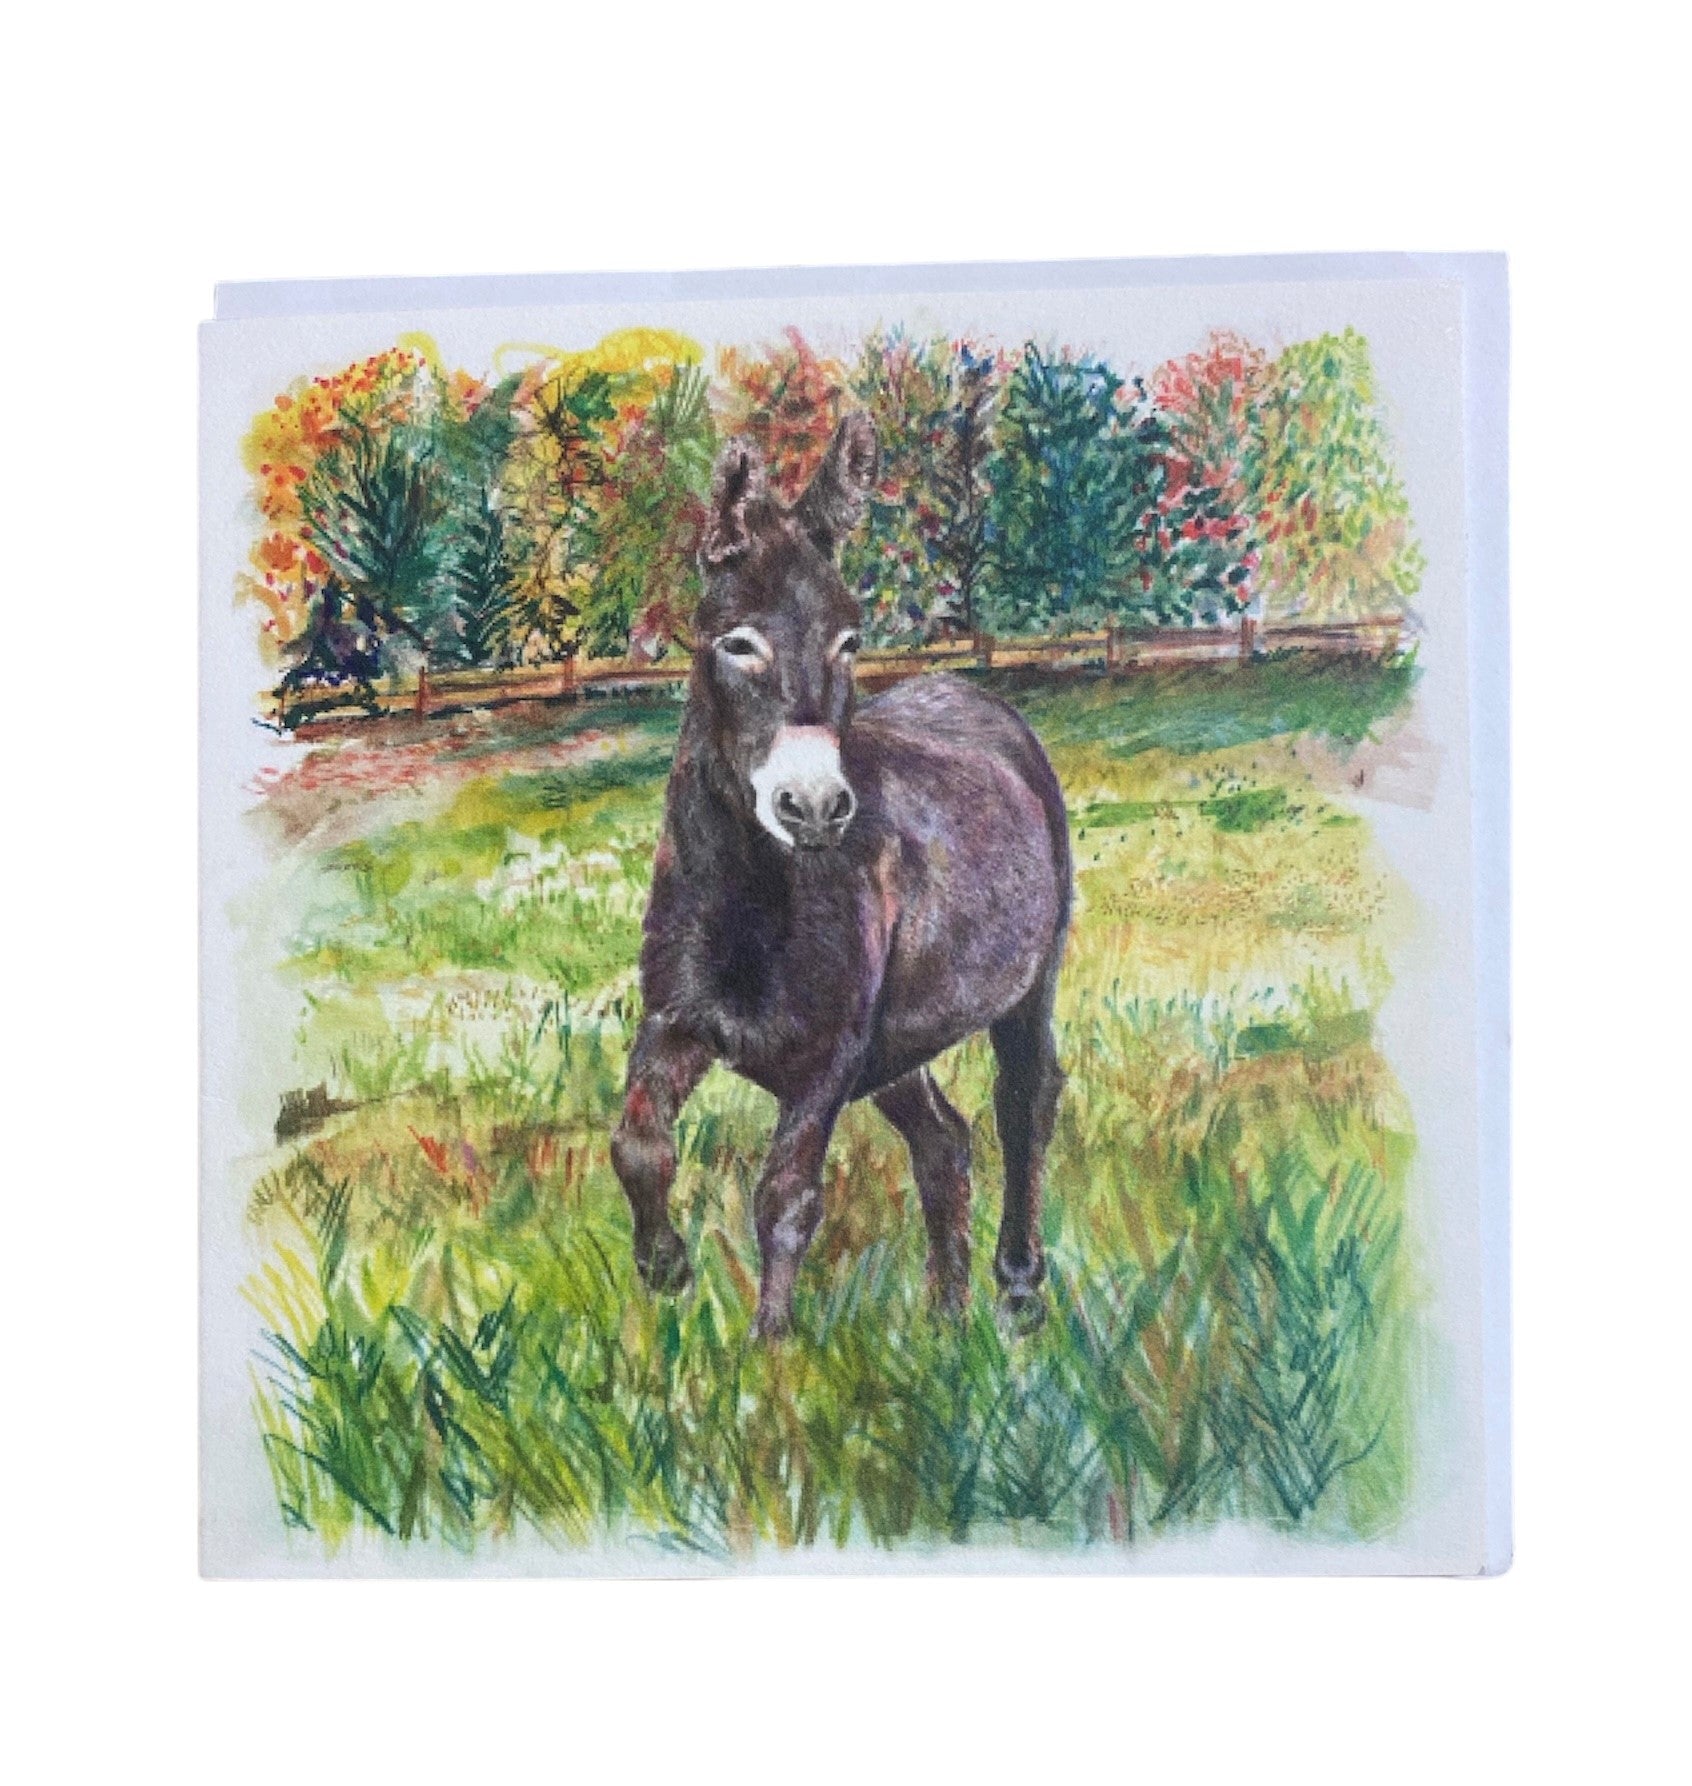 Image shows a beautiful illustration of our brown donkey called Denver standing in a field with a mixture of shades of green trees in the background